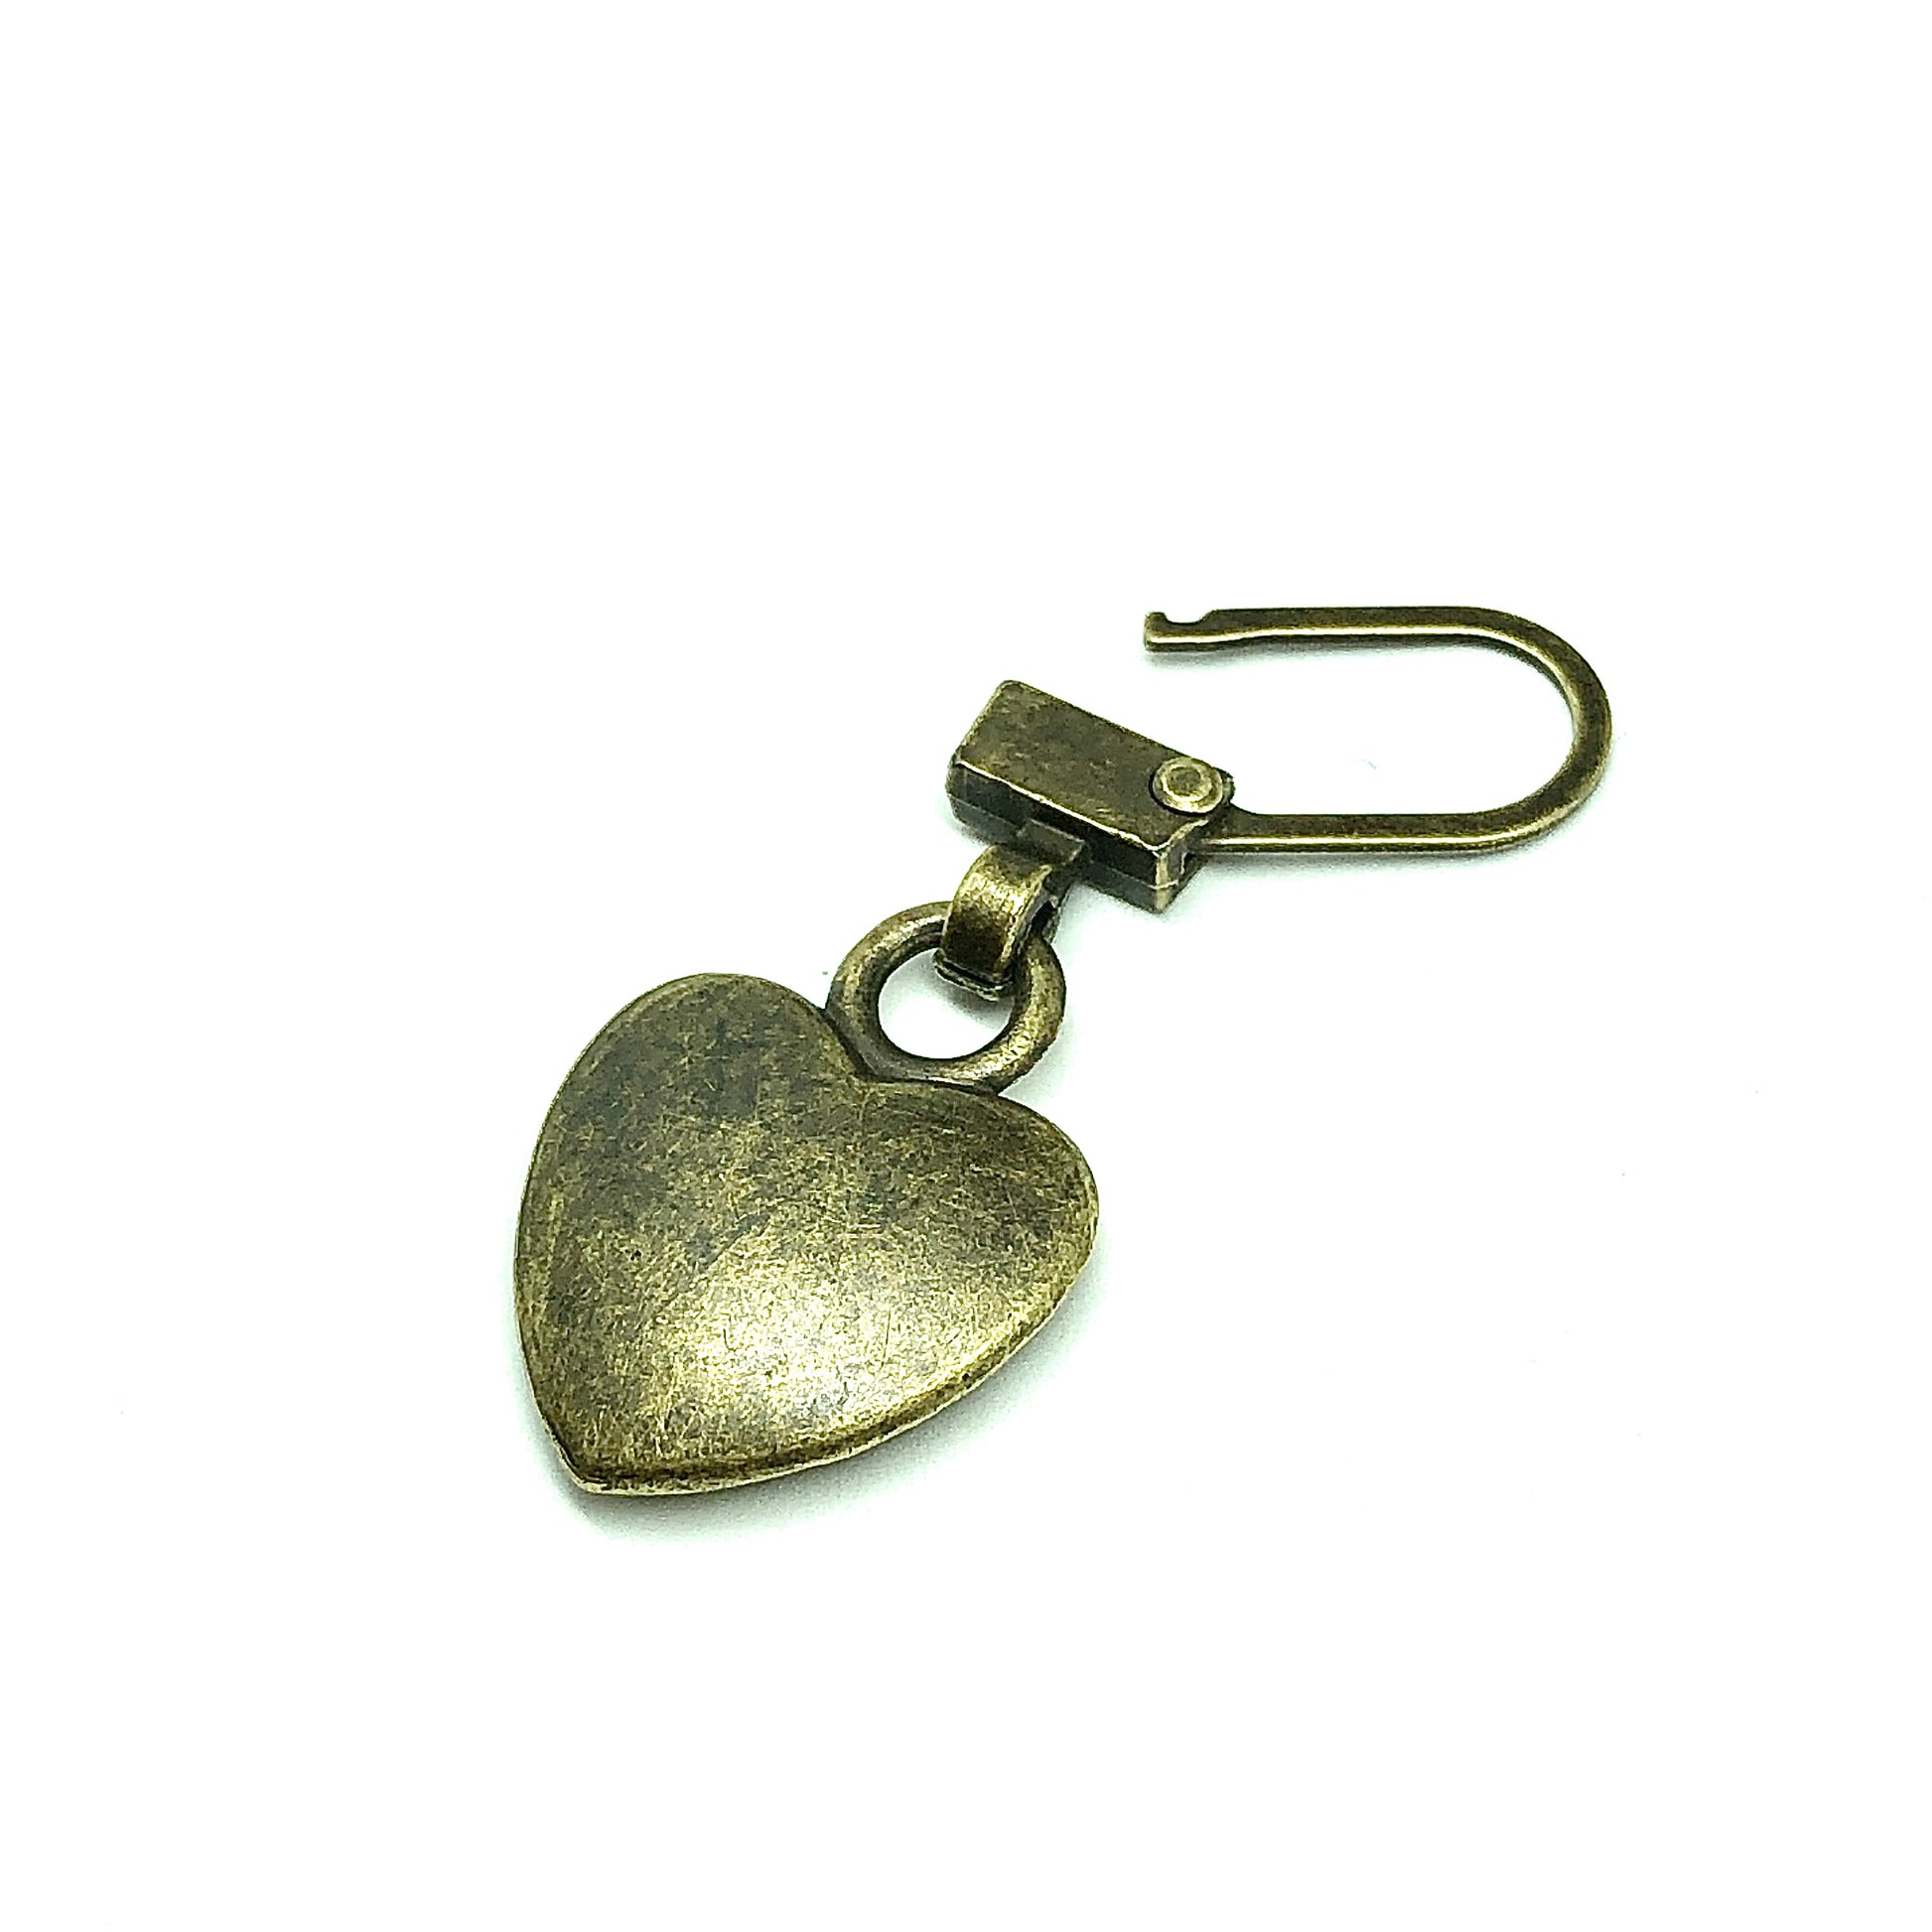 Zipper Pull Repair Charm Heart Rustic Bronze - for Repair or Decorate Shoes, Purses, Keychains + More | Accessories